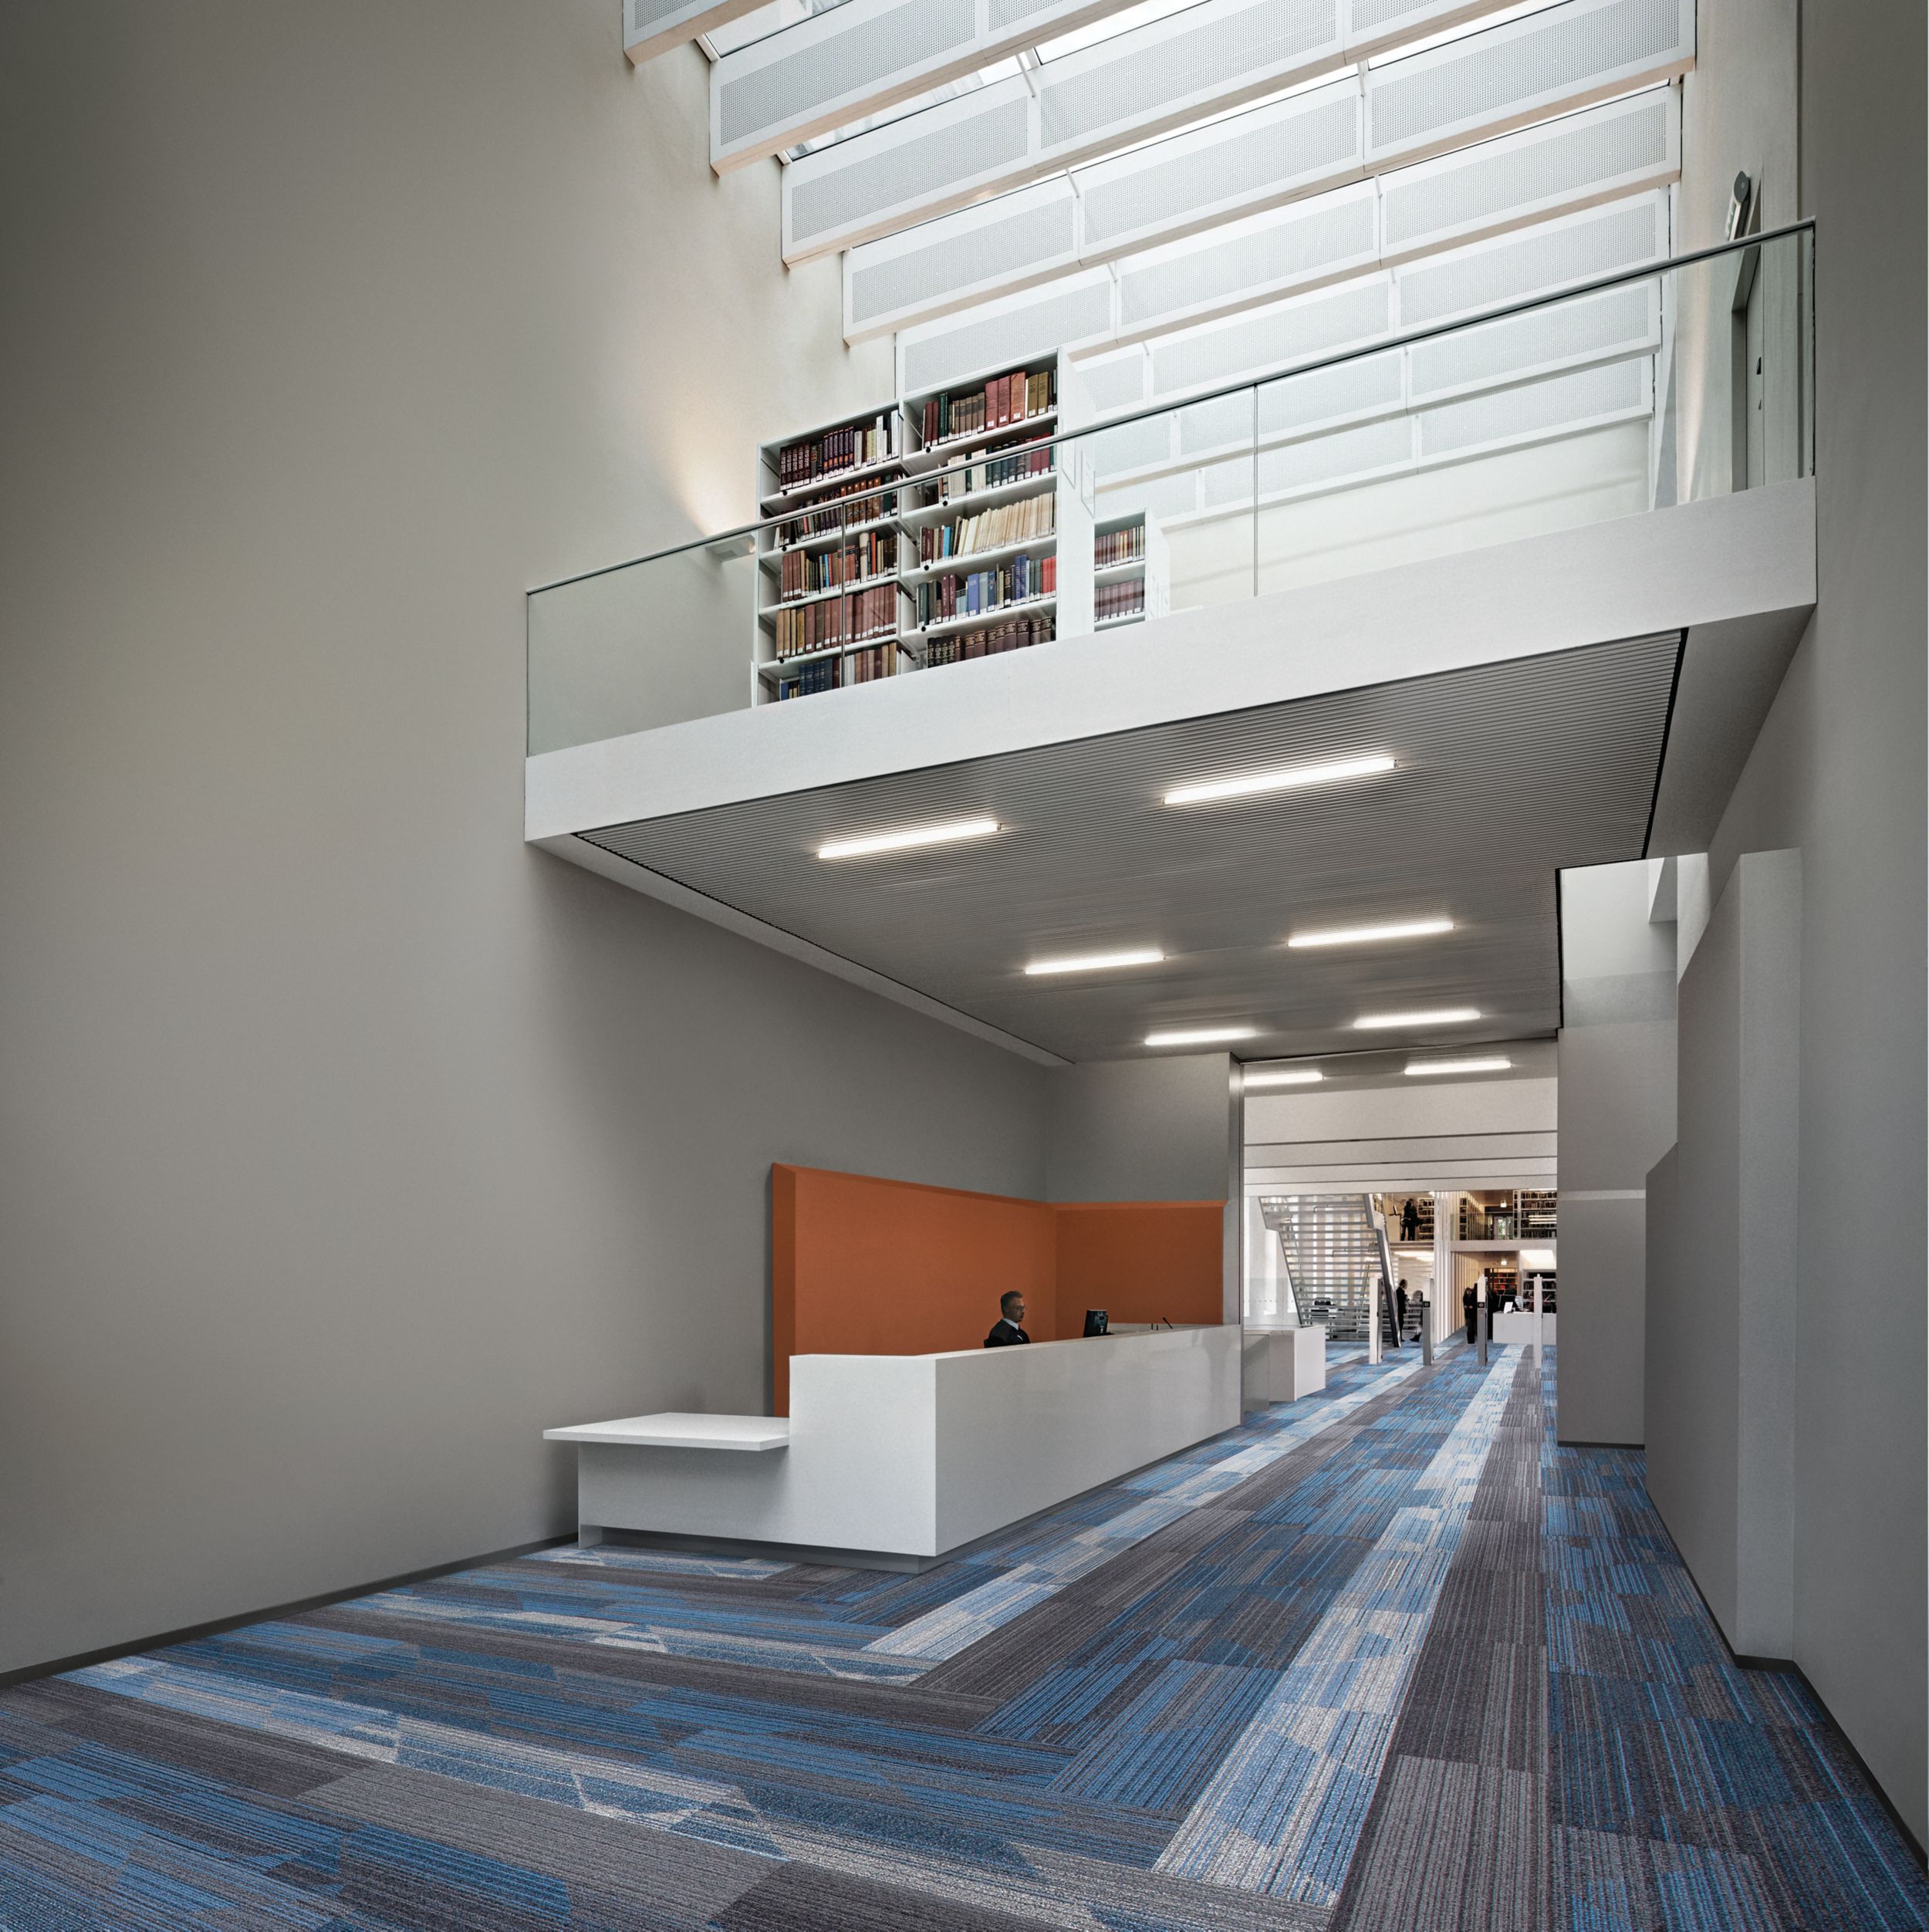 Interface Driftwood and Shiver Me Timbers plank carpet tile in recpetionist area of library image number 2